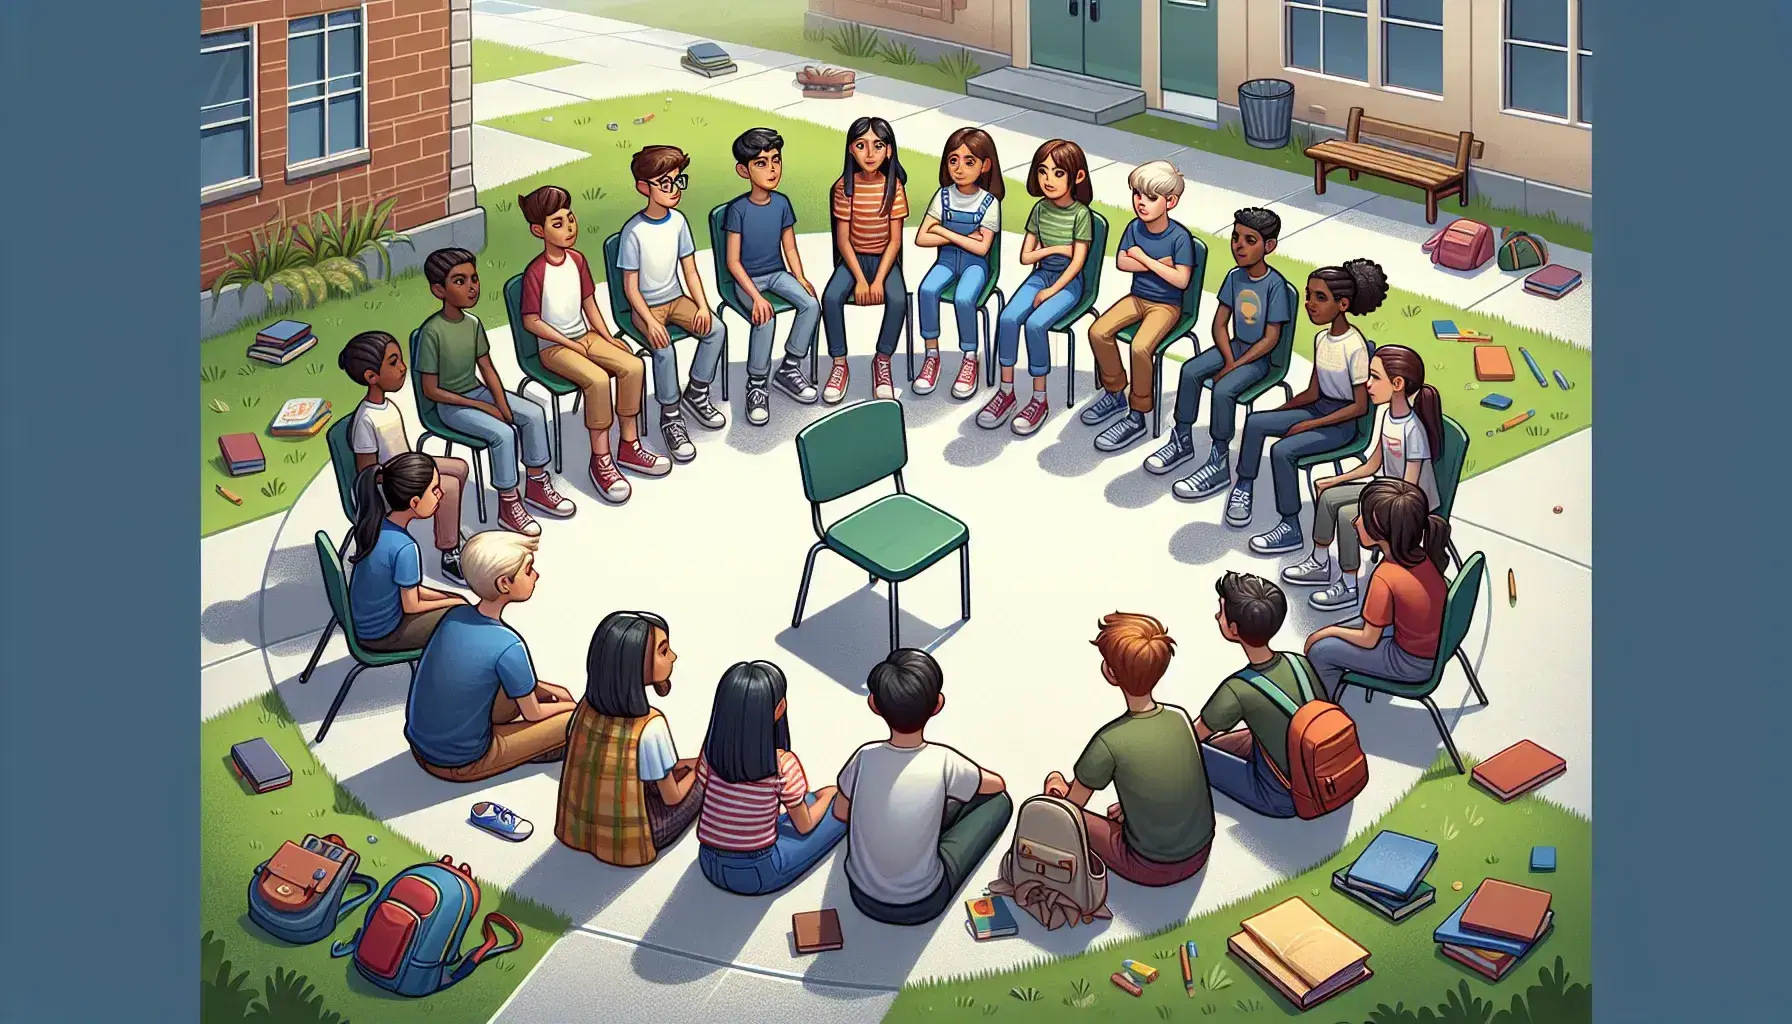 Group of multi-ethnic students standing in a circle for a discussion at school, with an empty chair in the center, backpacks and books around, under a blue sky.